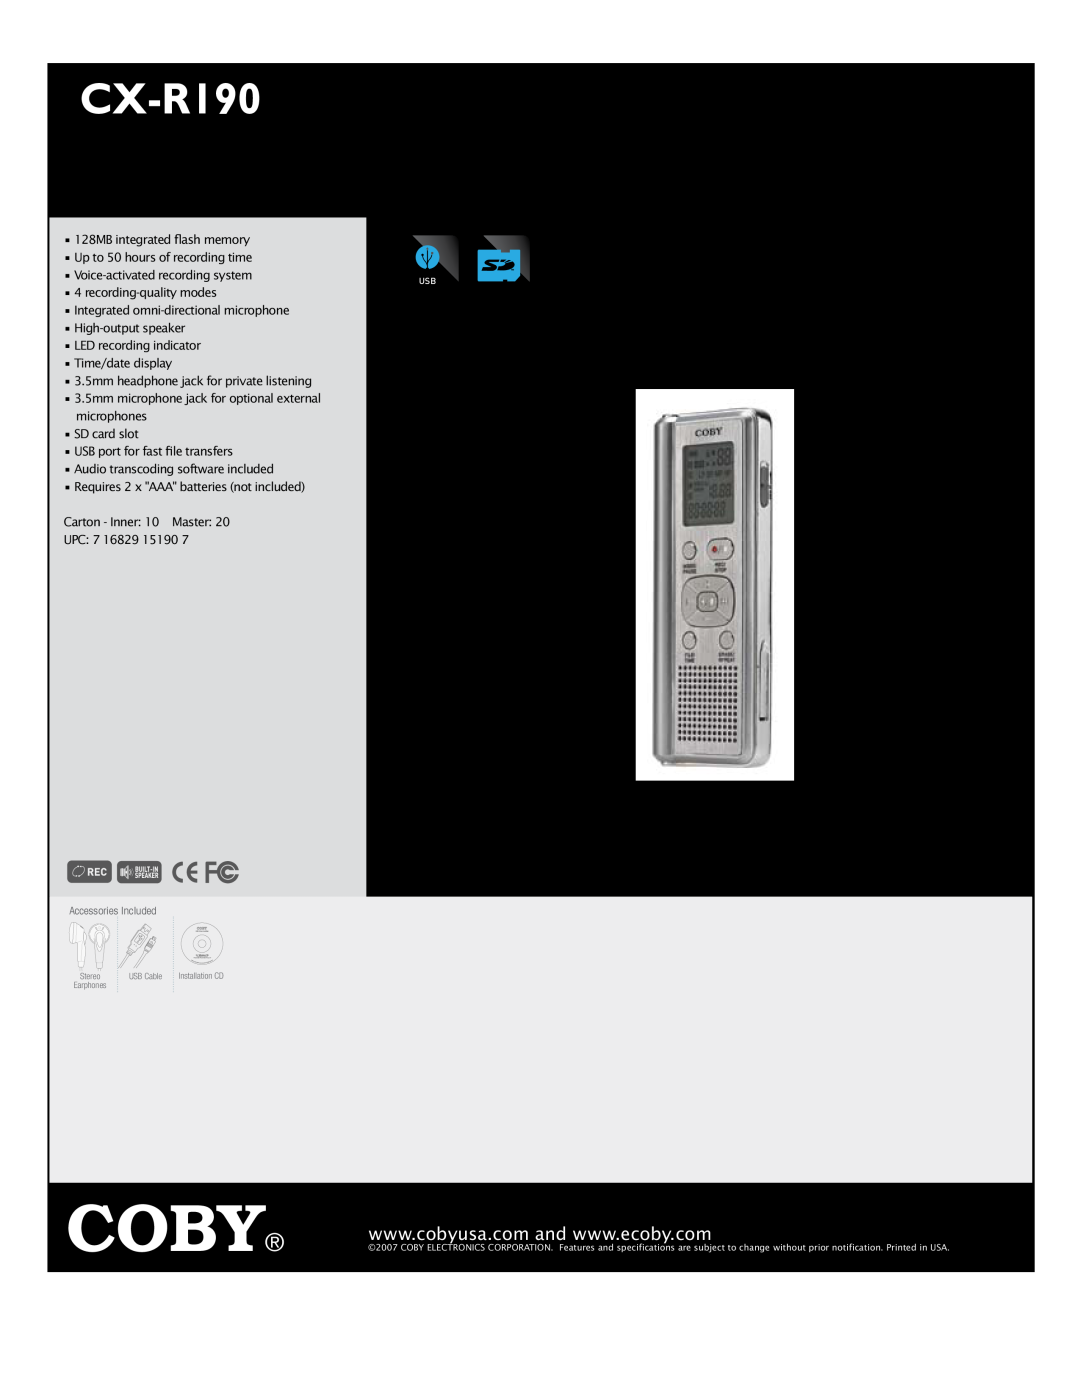 COBY electronic CX-R190 specifications Coby, Digital Voice Recorder with Integrated Speaker 